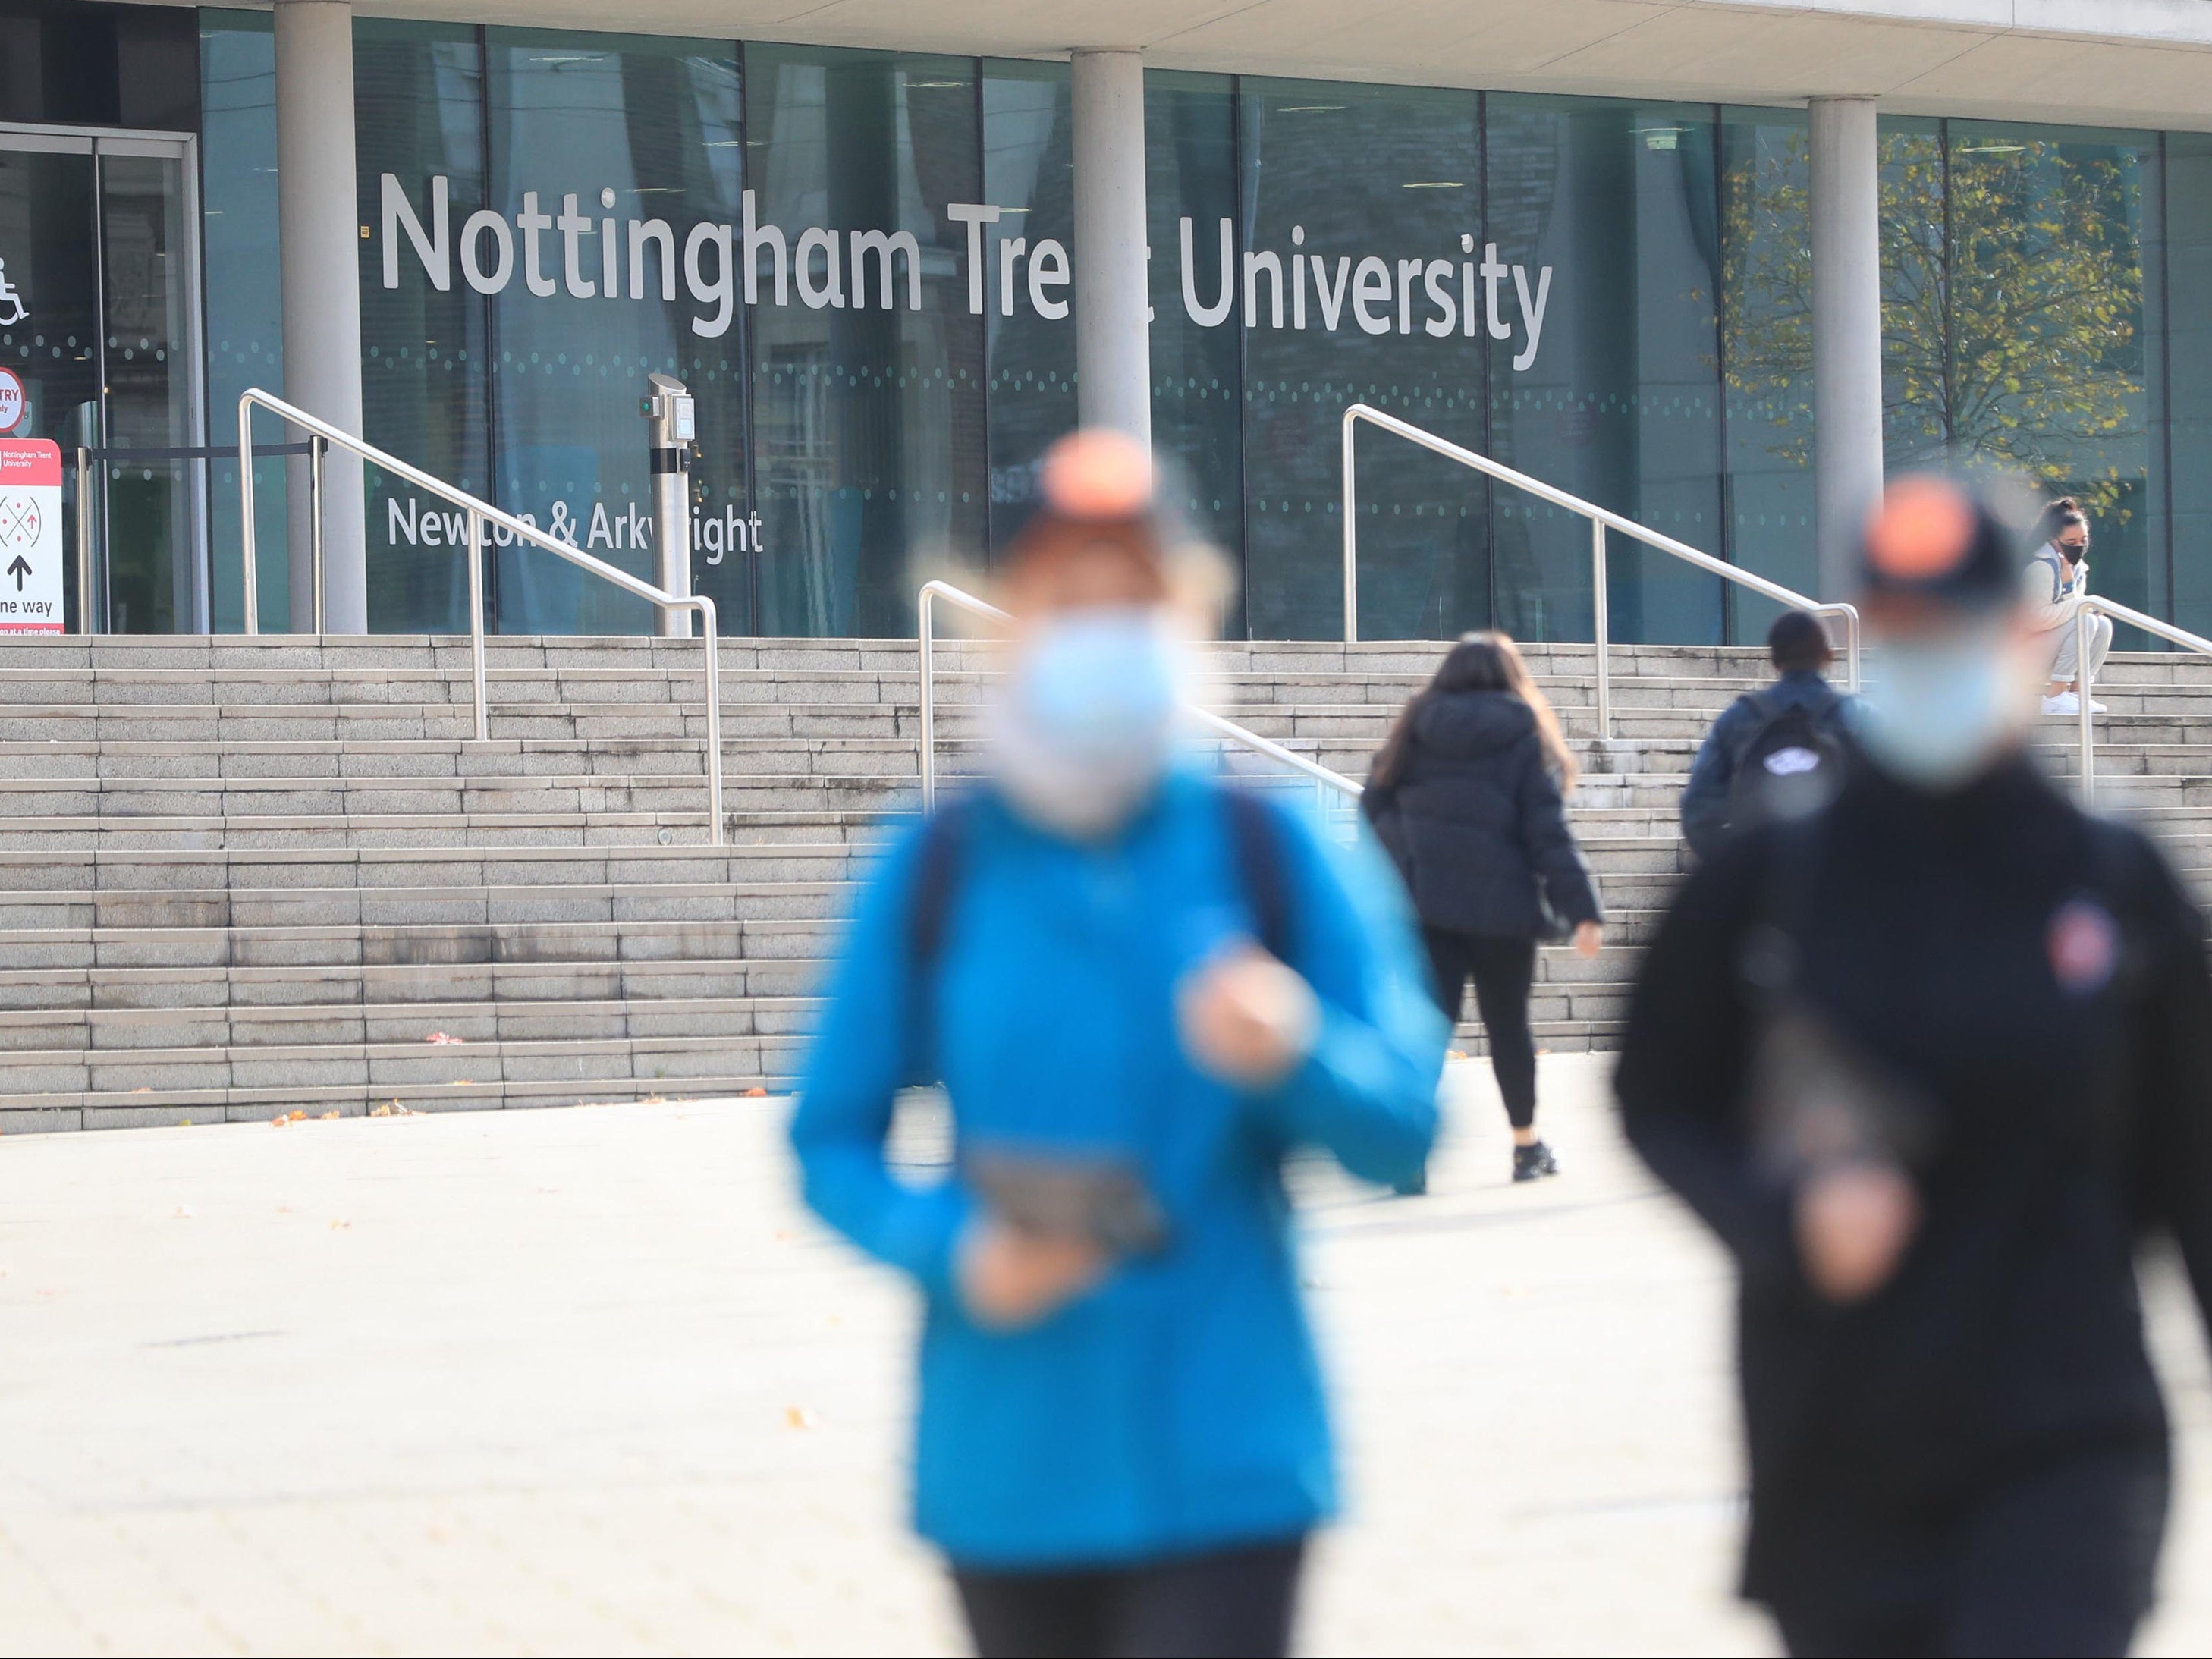 Nottingham Trent University has since confirmed all those involved in the incident have been suspended pending an investigation